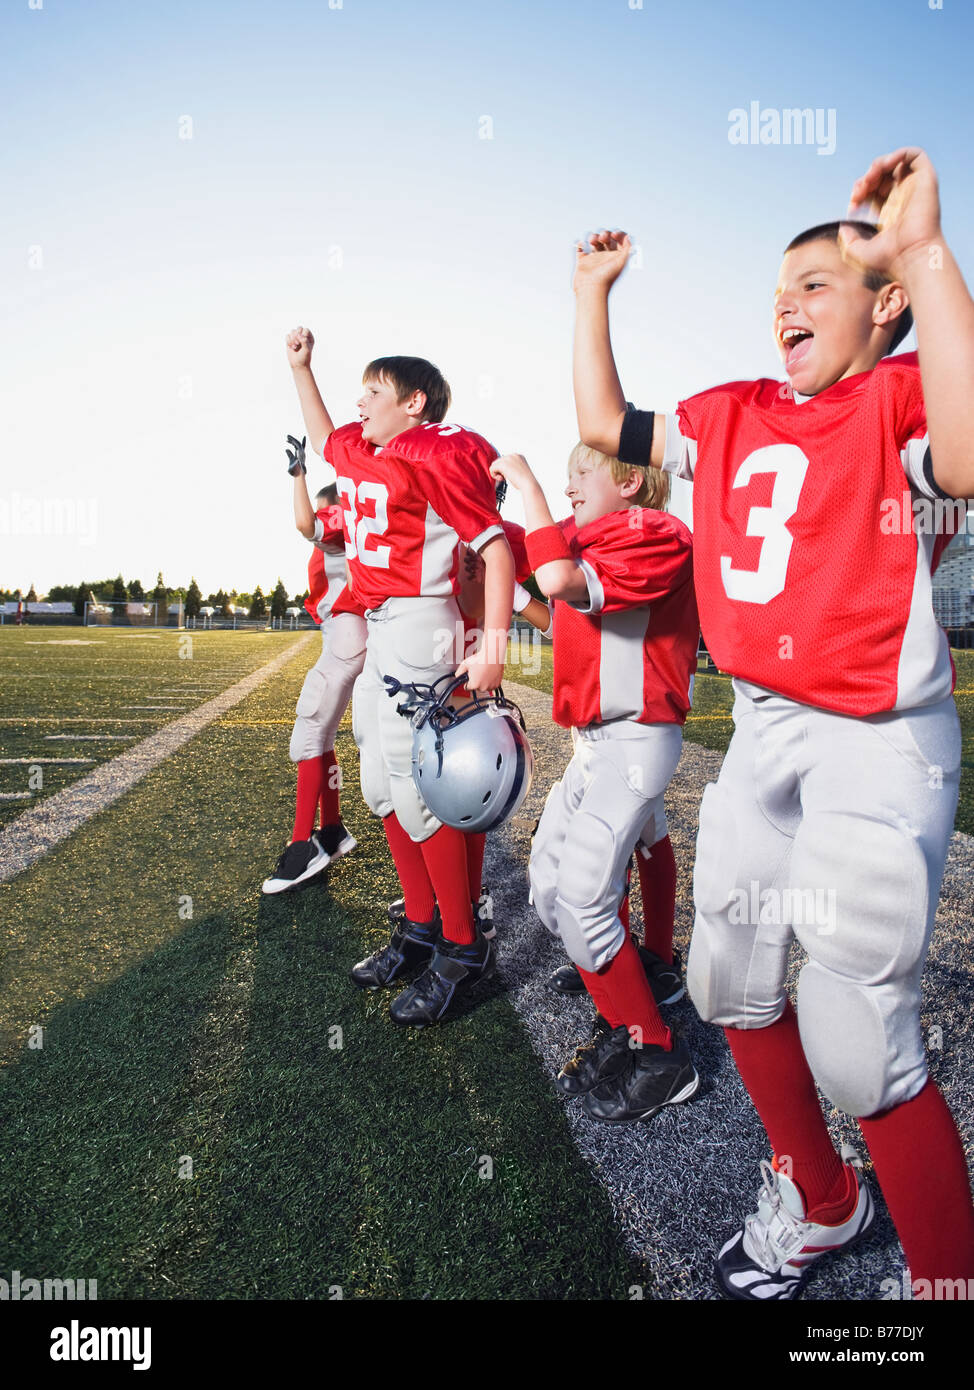 Football players cheering on sideline Stock Photo